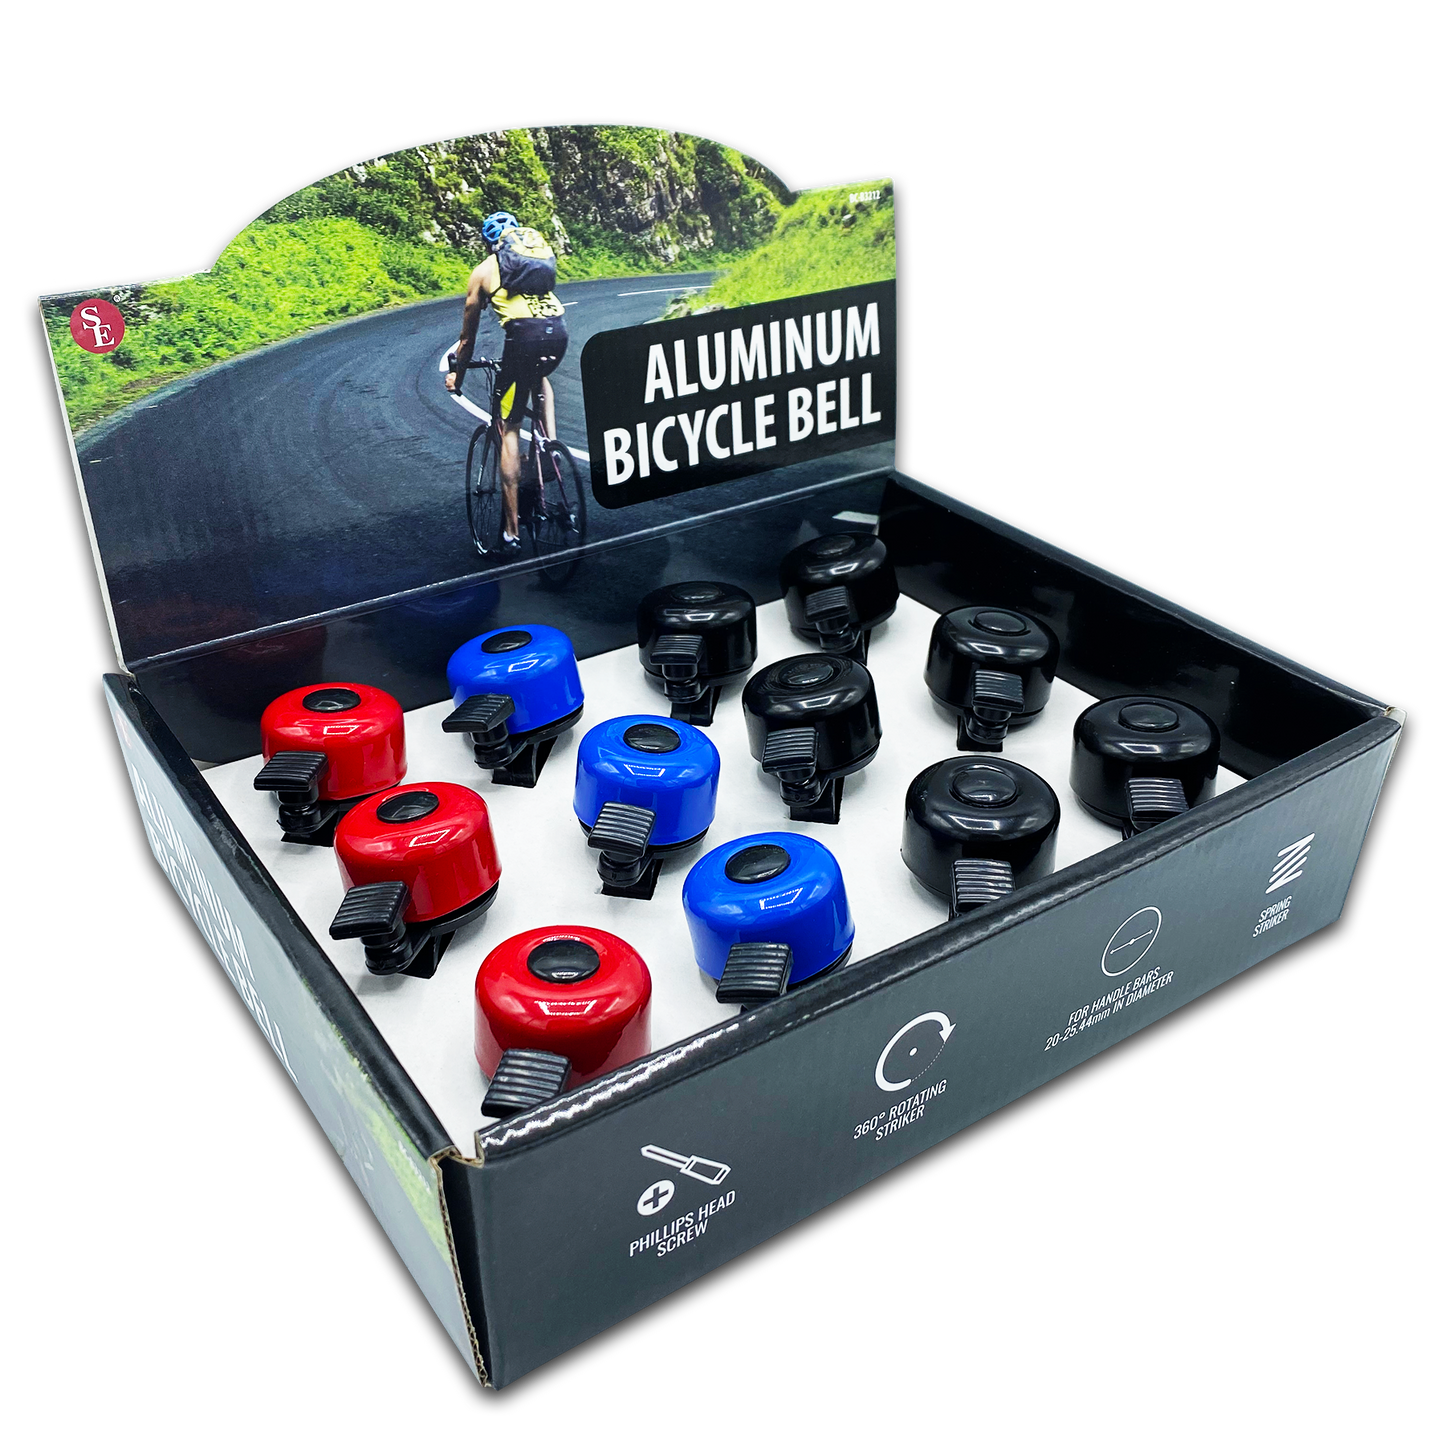 12PC ALUMINUM BICYCLE BELL DISPLAY